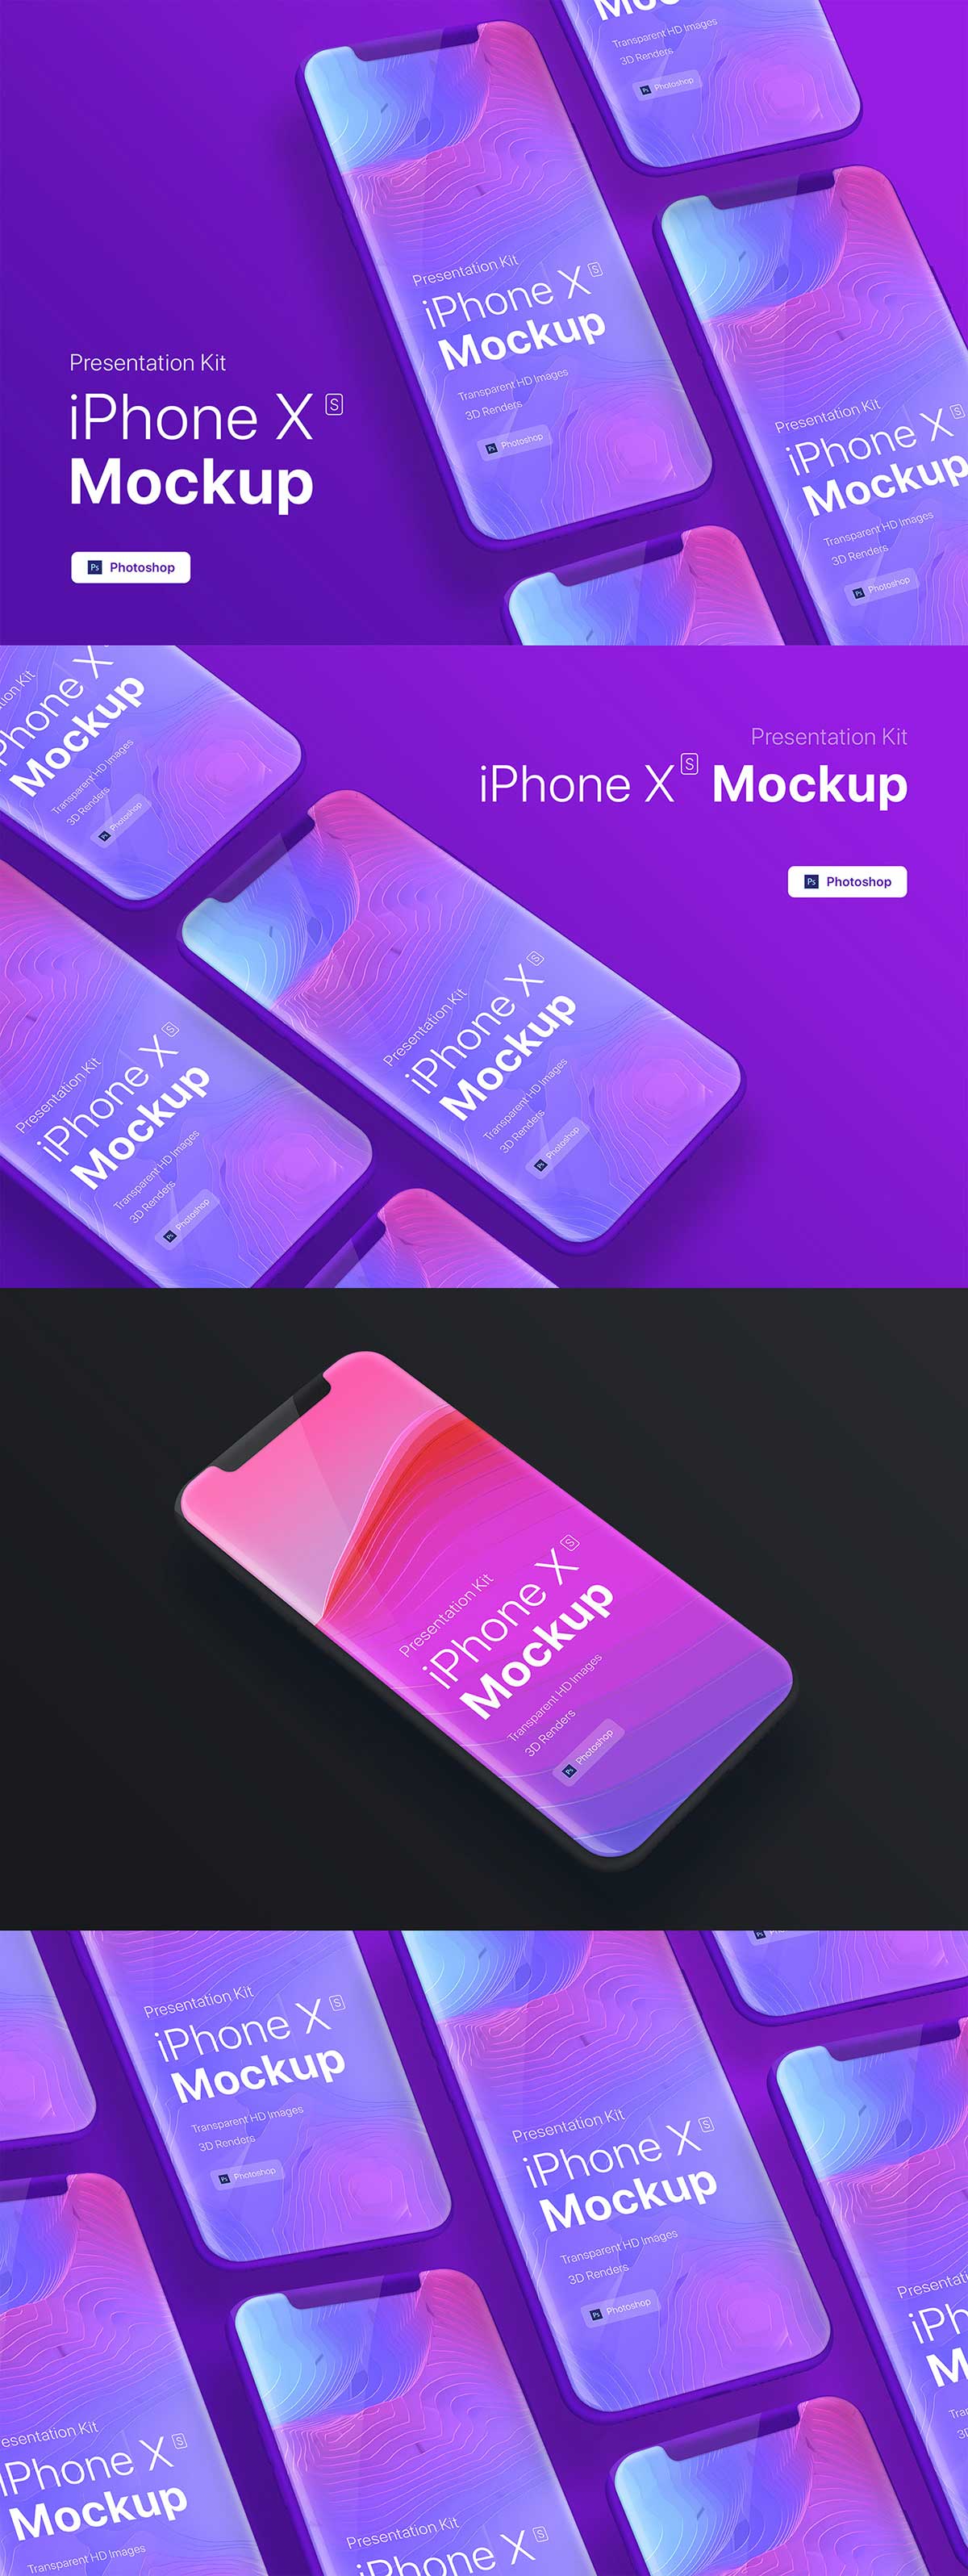 iPhone XS Mobile App Showcase device Mock-up free psd